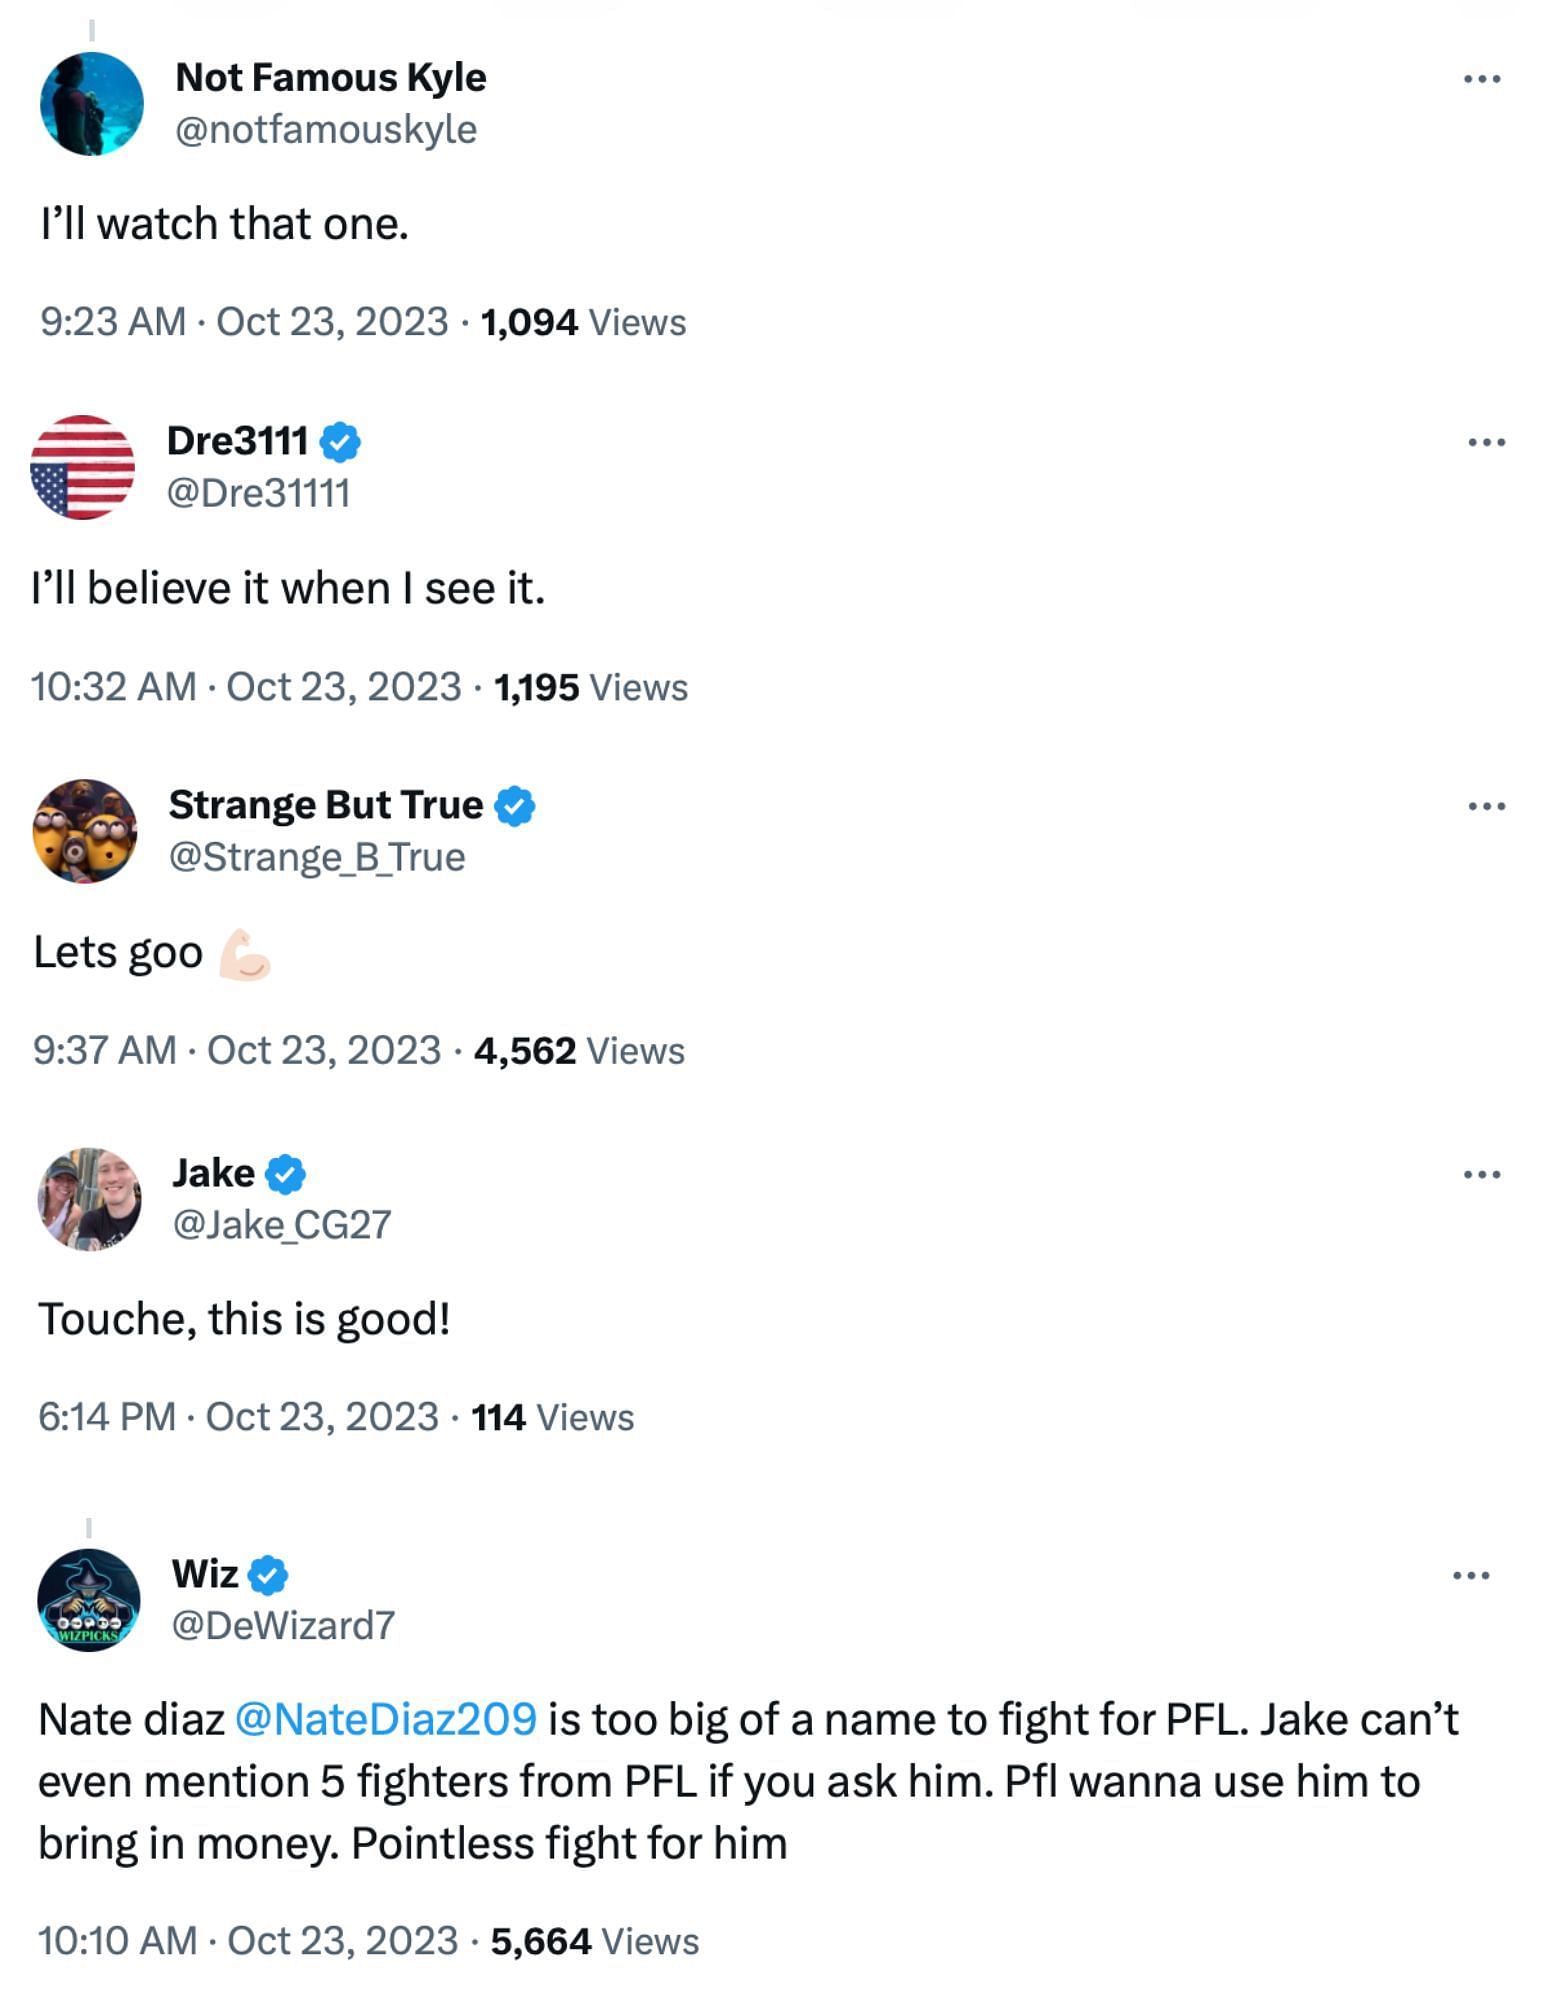 Fan reactions to a potential Paul vs Diaz fight in the PFL on X